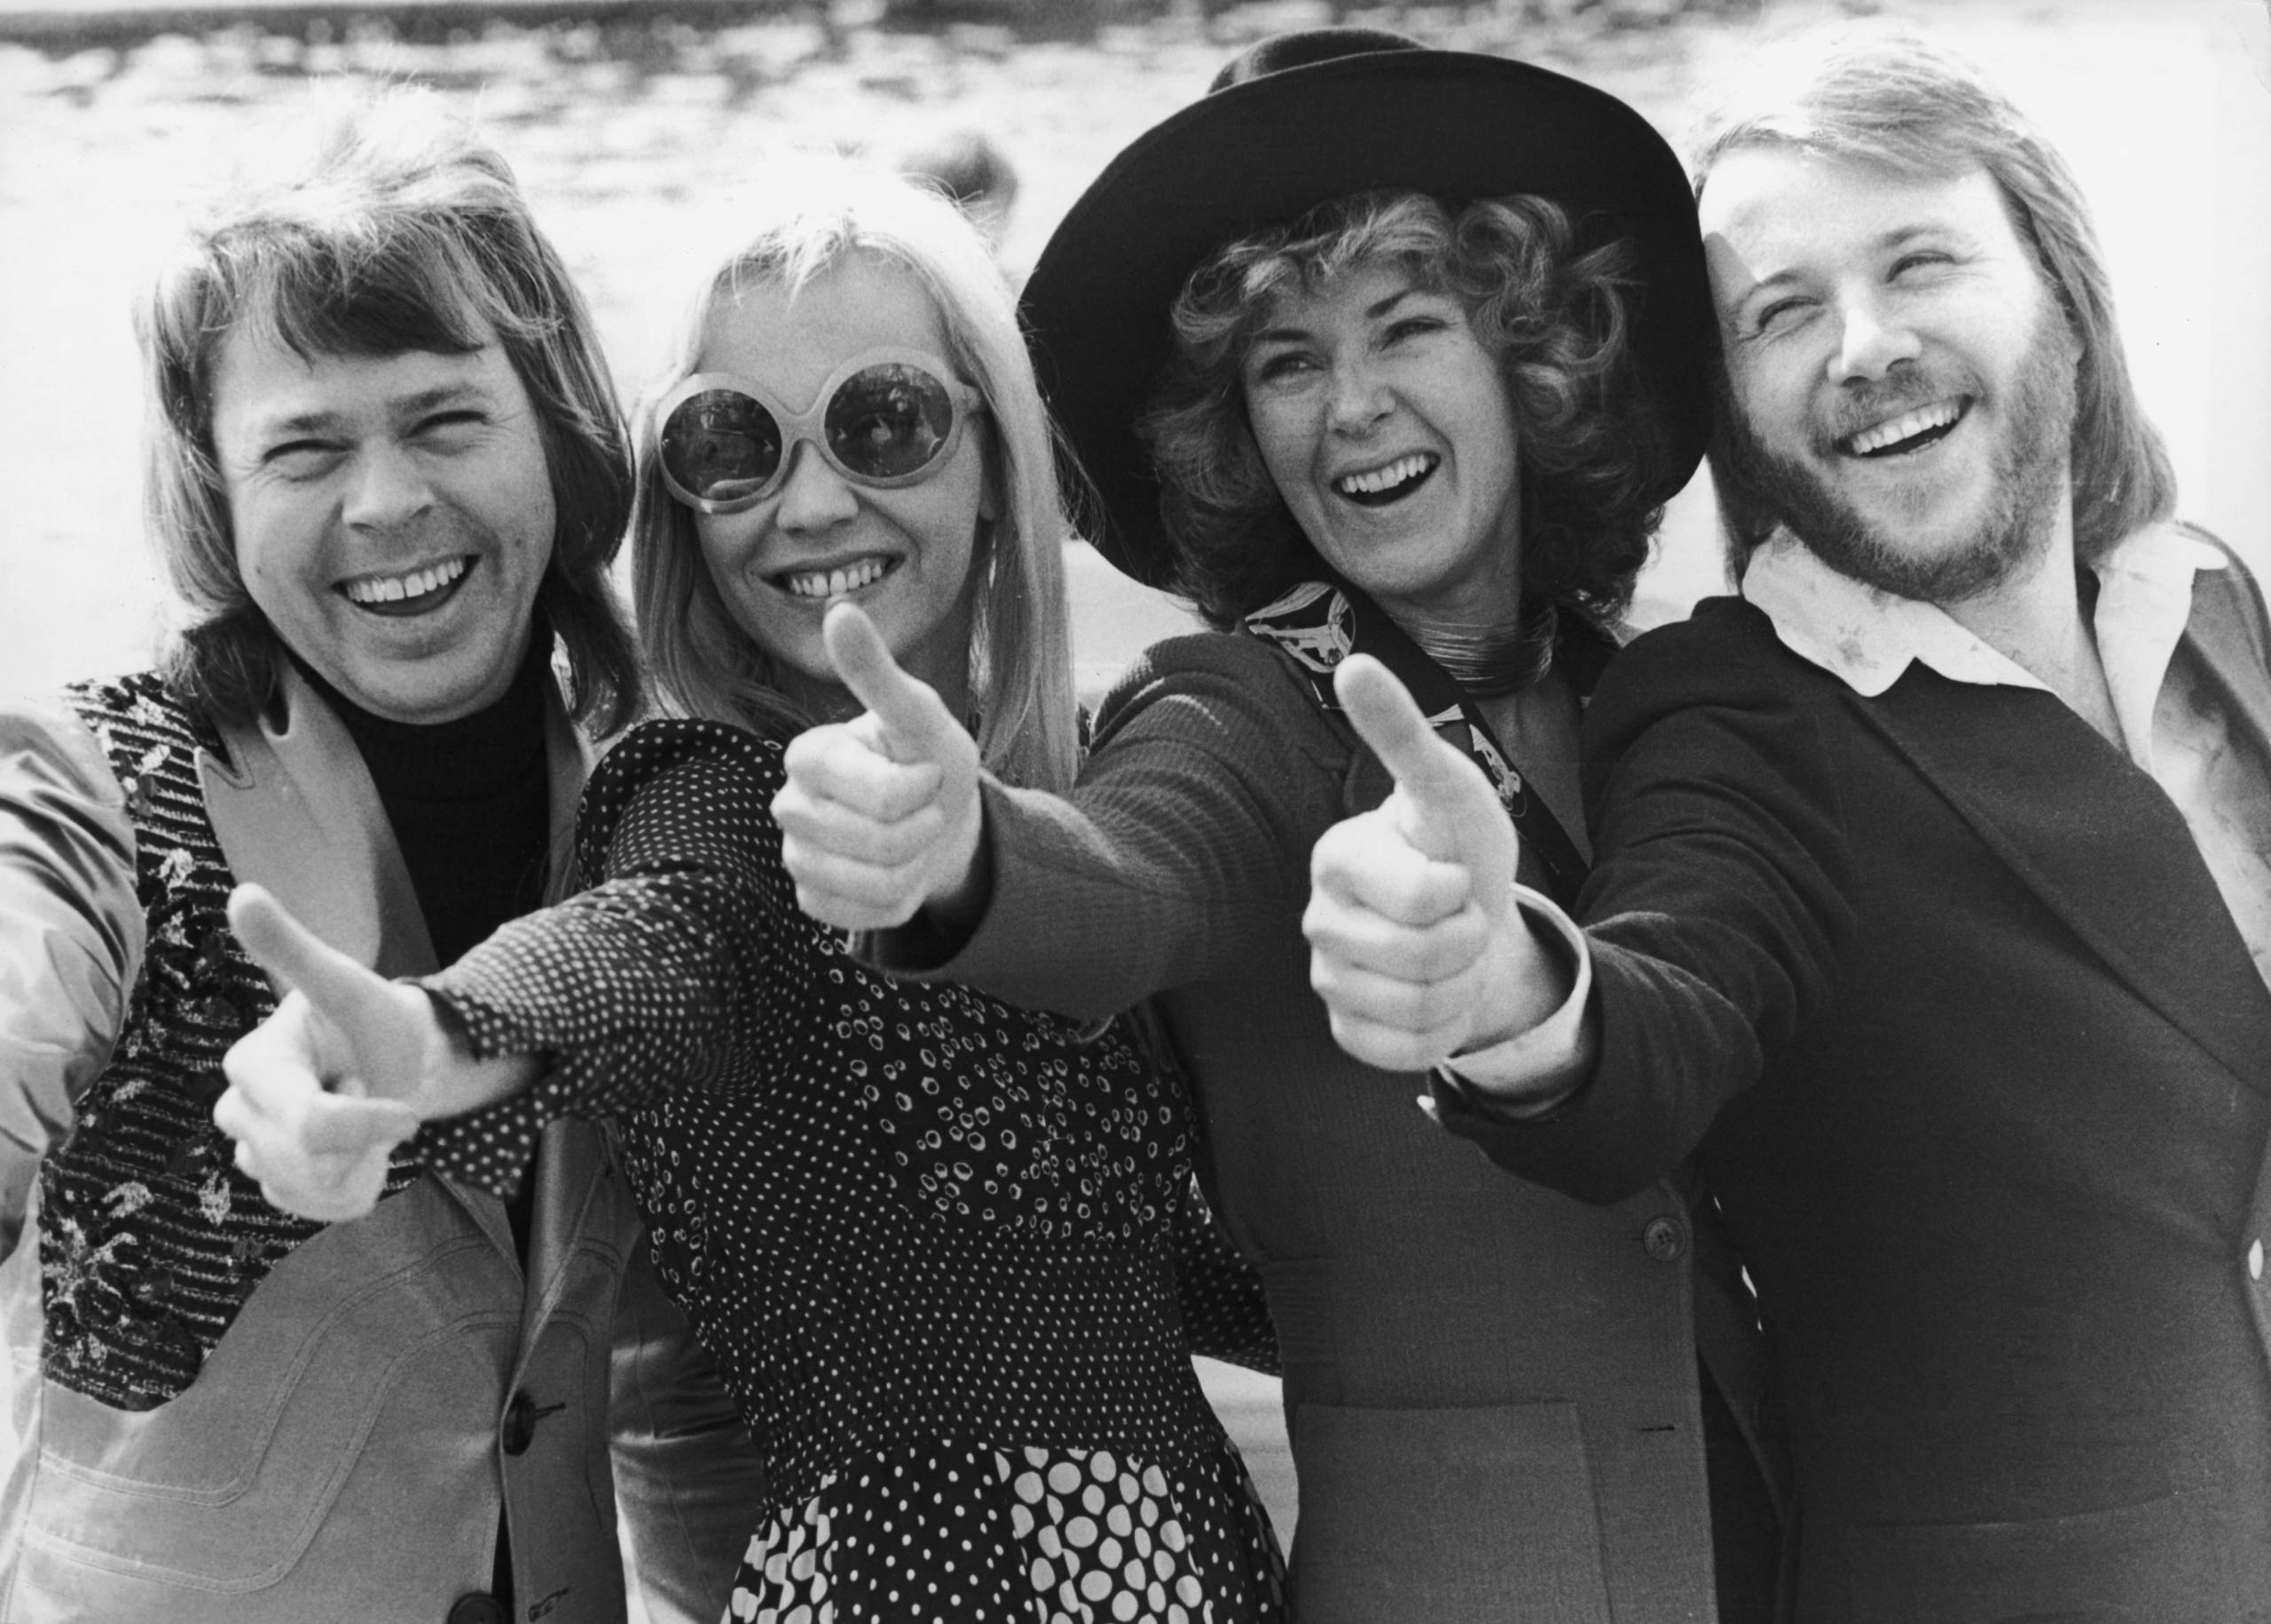 ABBA in Brighton, 7. April 1974. Von links nach rechts: Bjorn Ulvaeus, Agnetha Faltskog, Anni-Frid Lyngstad and Benny Andersson. (Foto: Steve Wood/Daily Express/Hulton Archive/Getty Images)